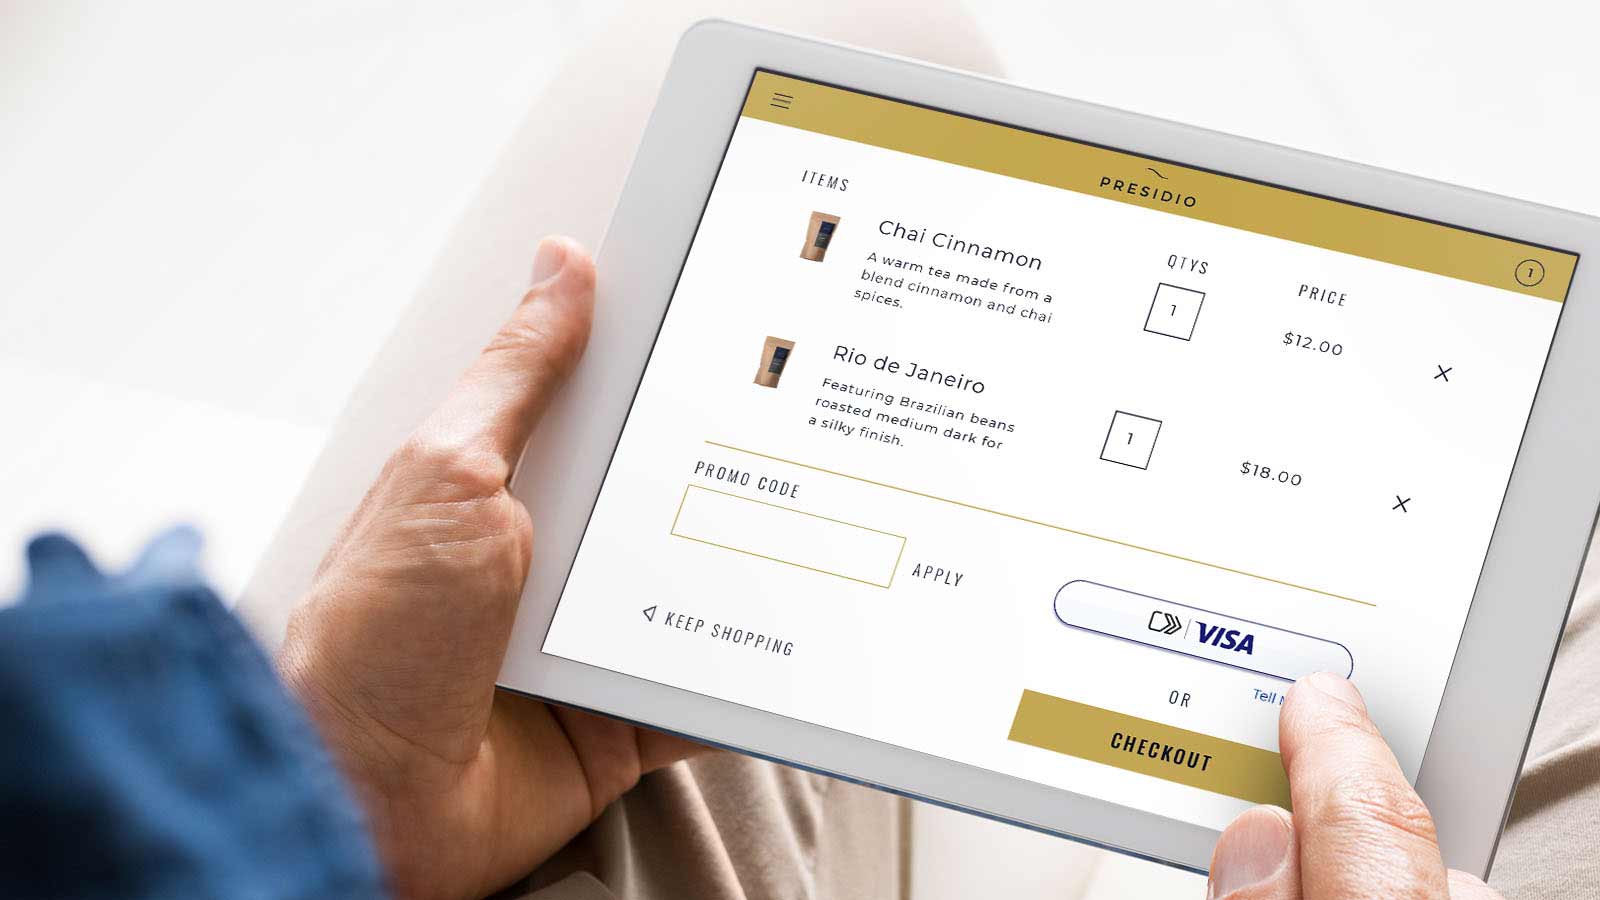 An individual is seen utilizing an iPad to complete a coffee purchase through guest checkout. 